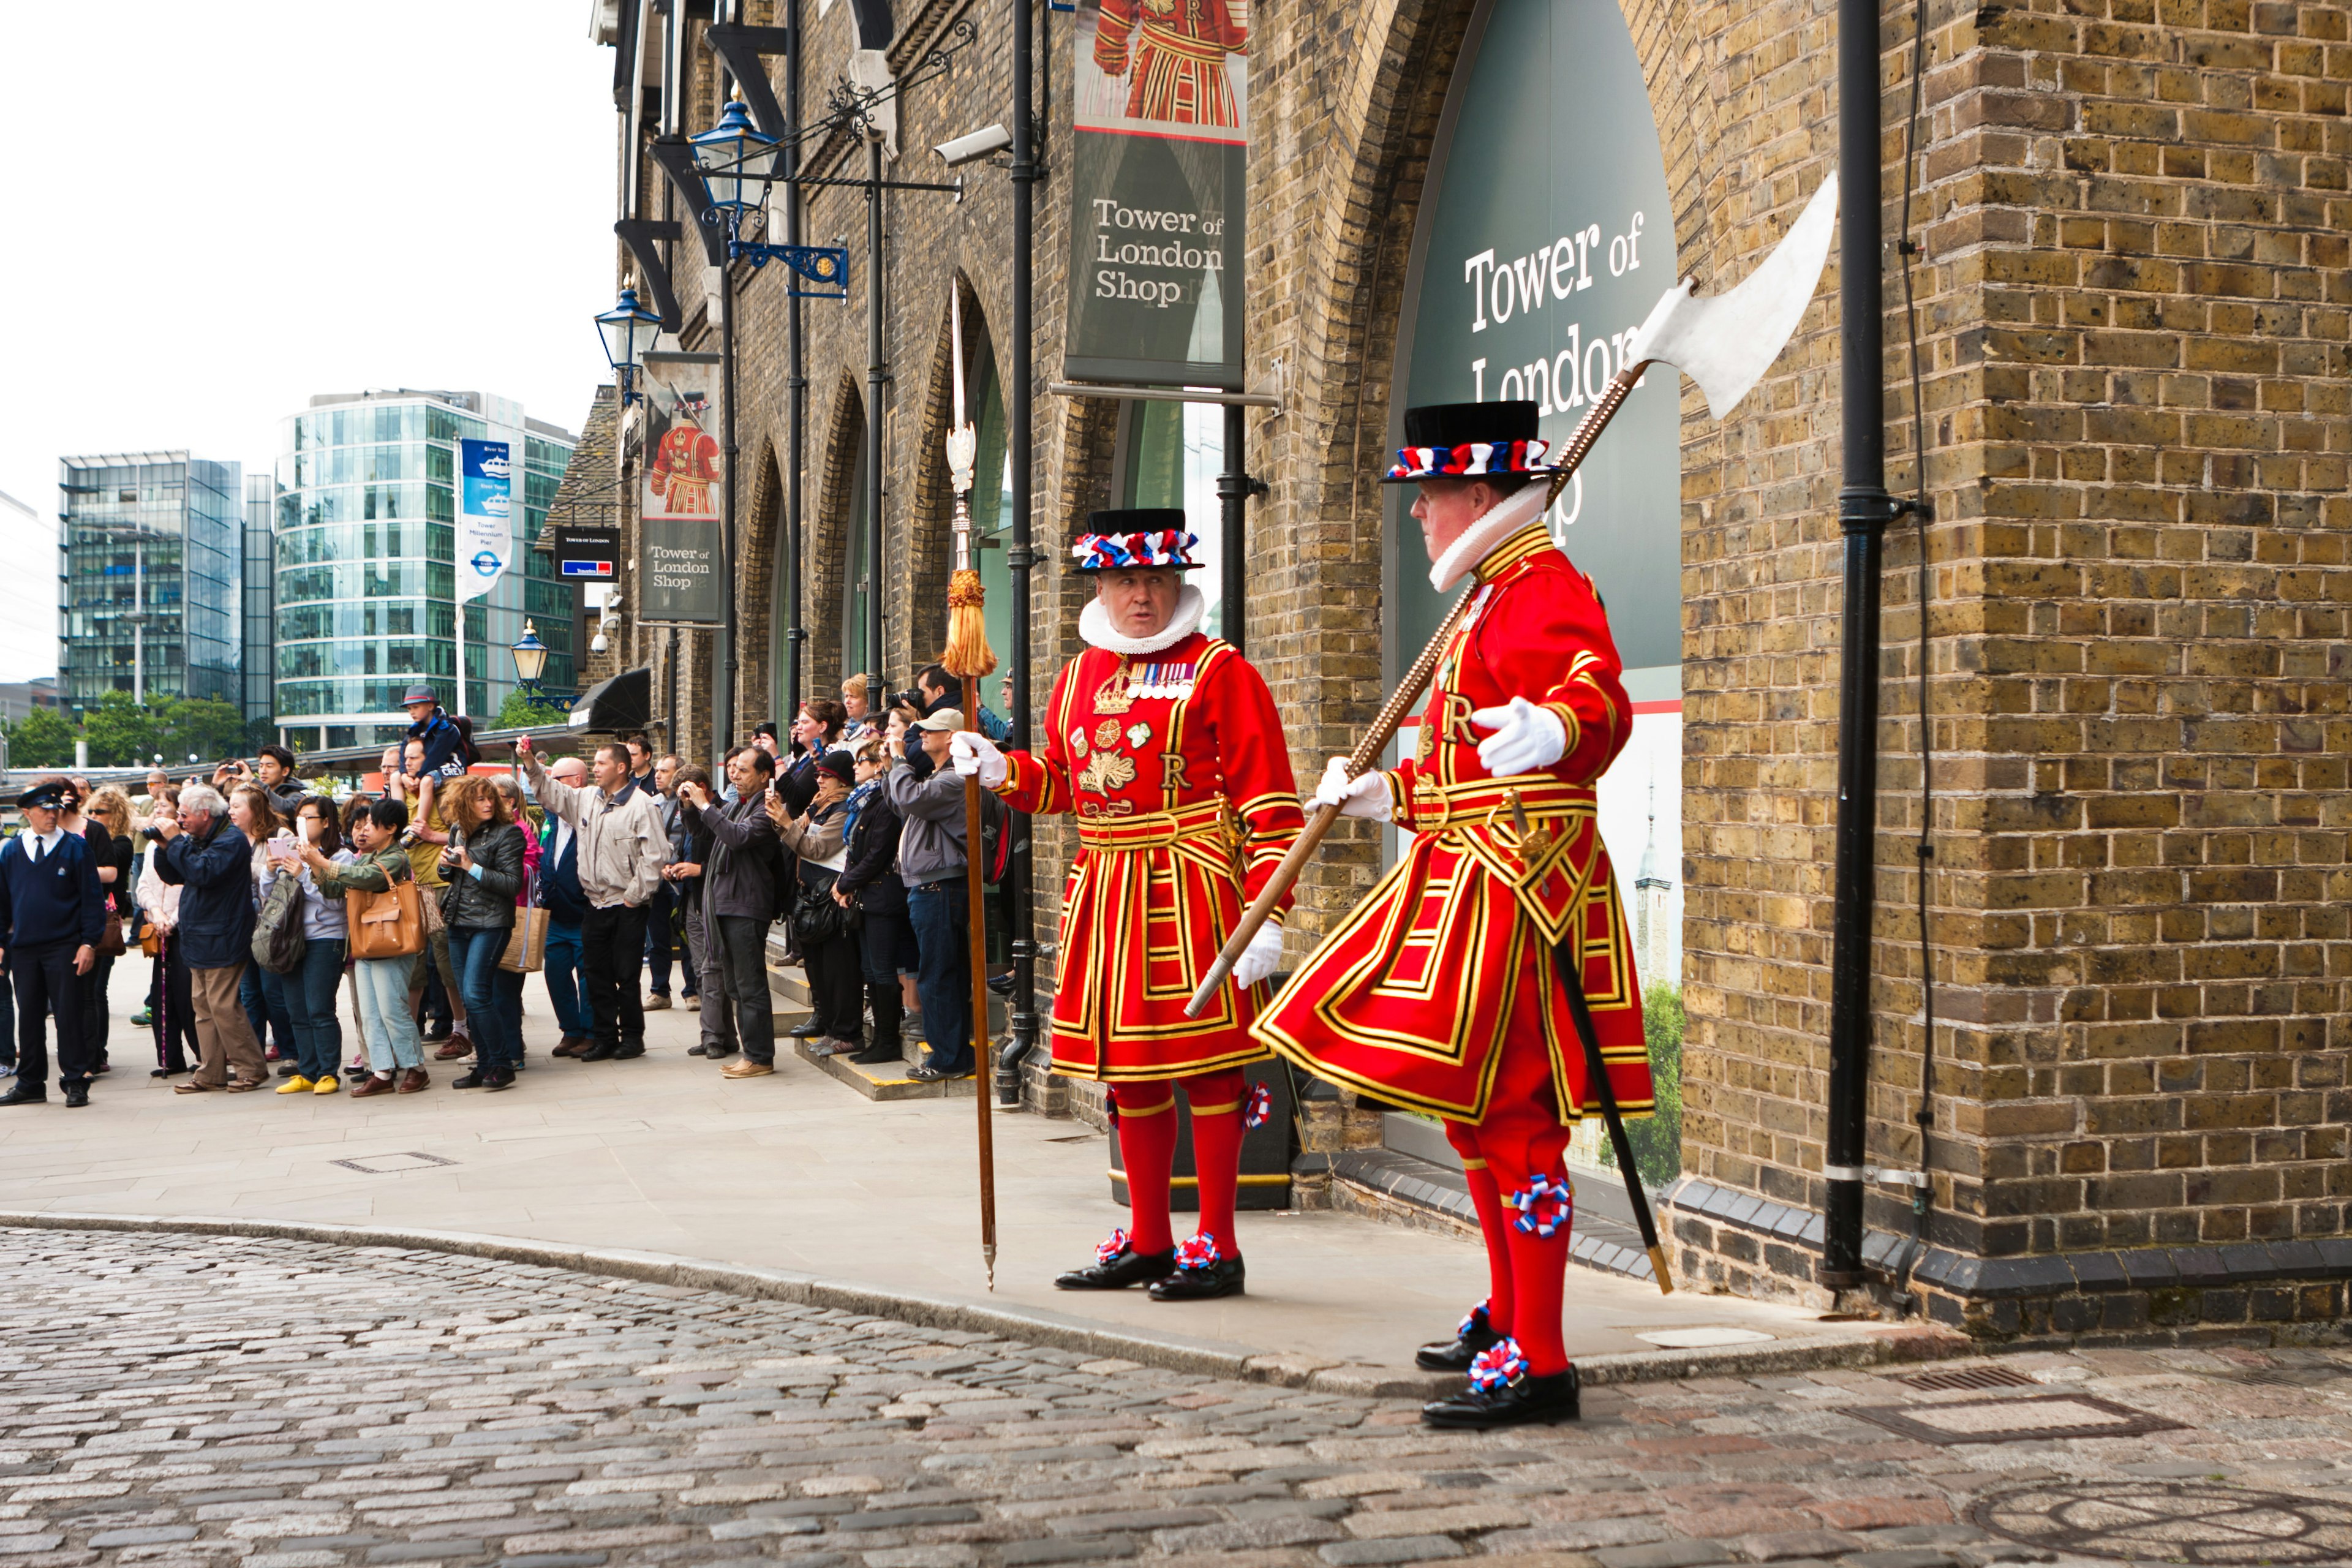 May 23, 2014: Yeomen Warders in uniform outside the Tower of London.